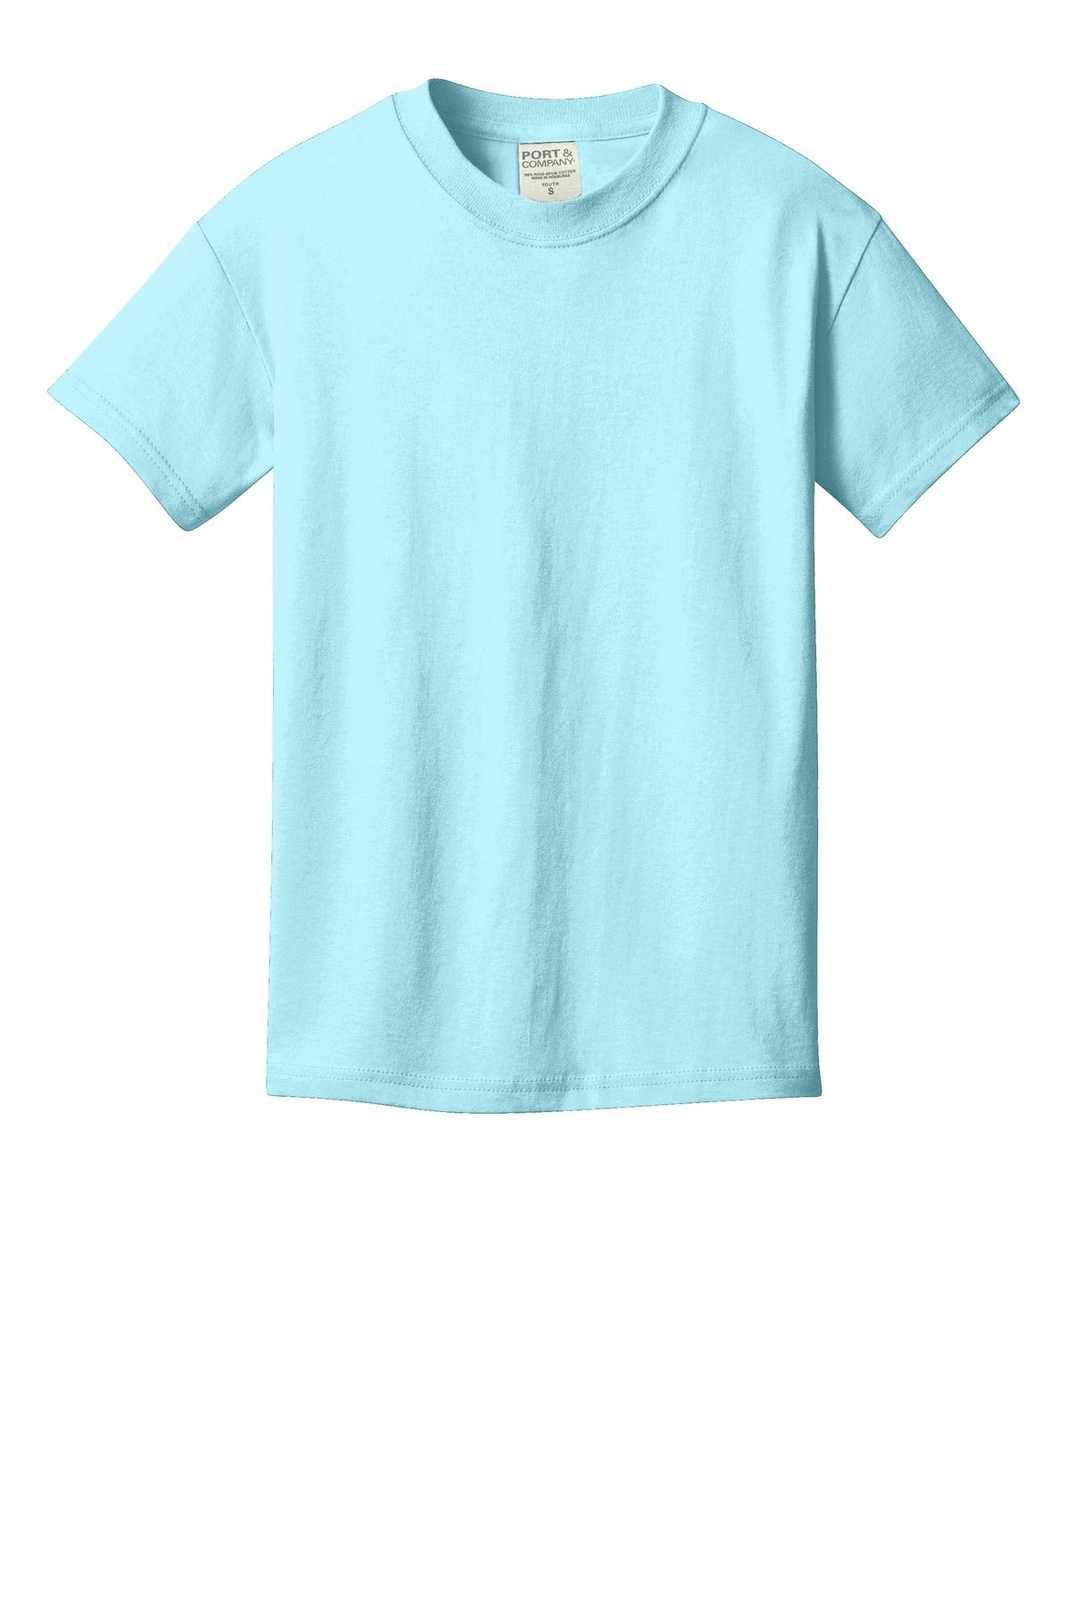 Port & Company PC099Y Youth Beach Wash Garment-Dyed Tee - Glacier - HIT a Double - 1